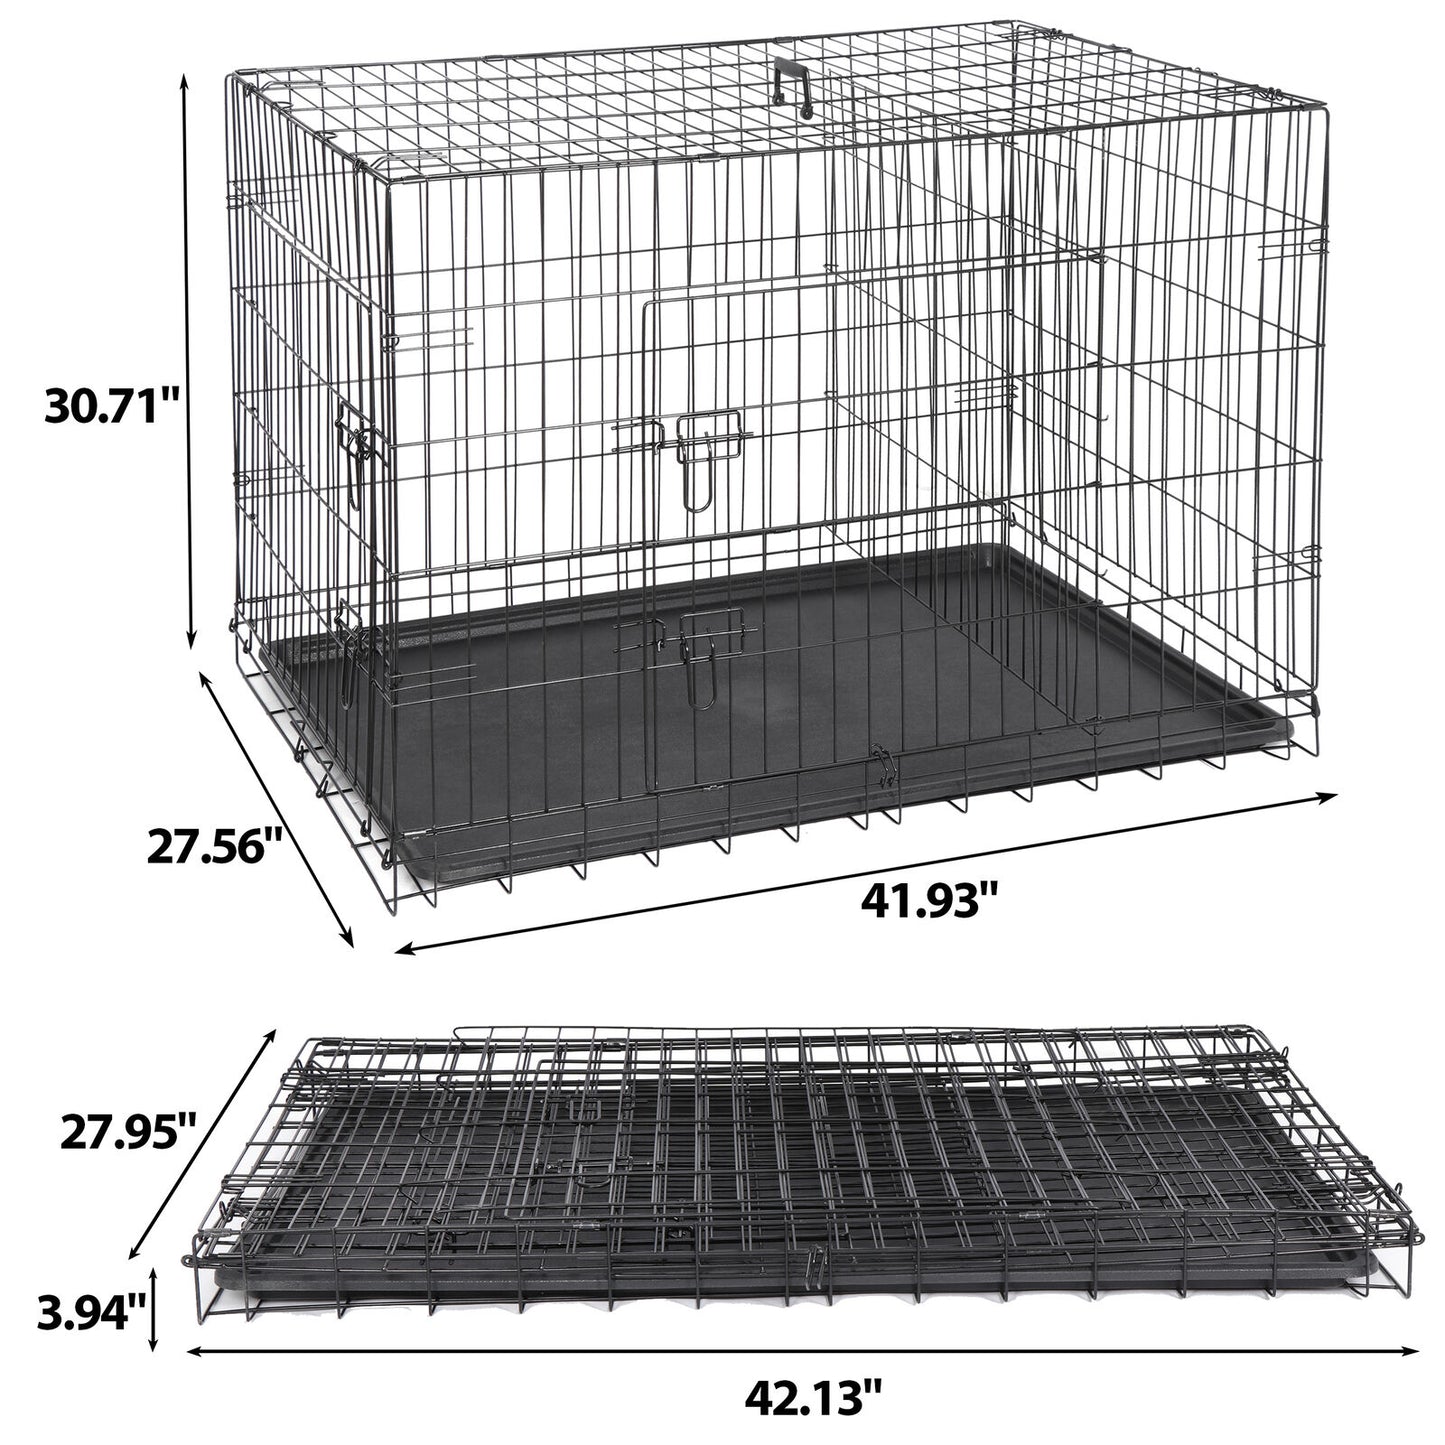 42" Metal Pets Dog Crate Double Door Folding Metal Dog Crates Fully Equipped